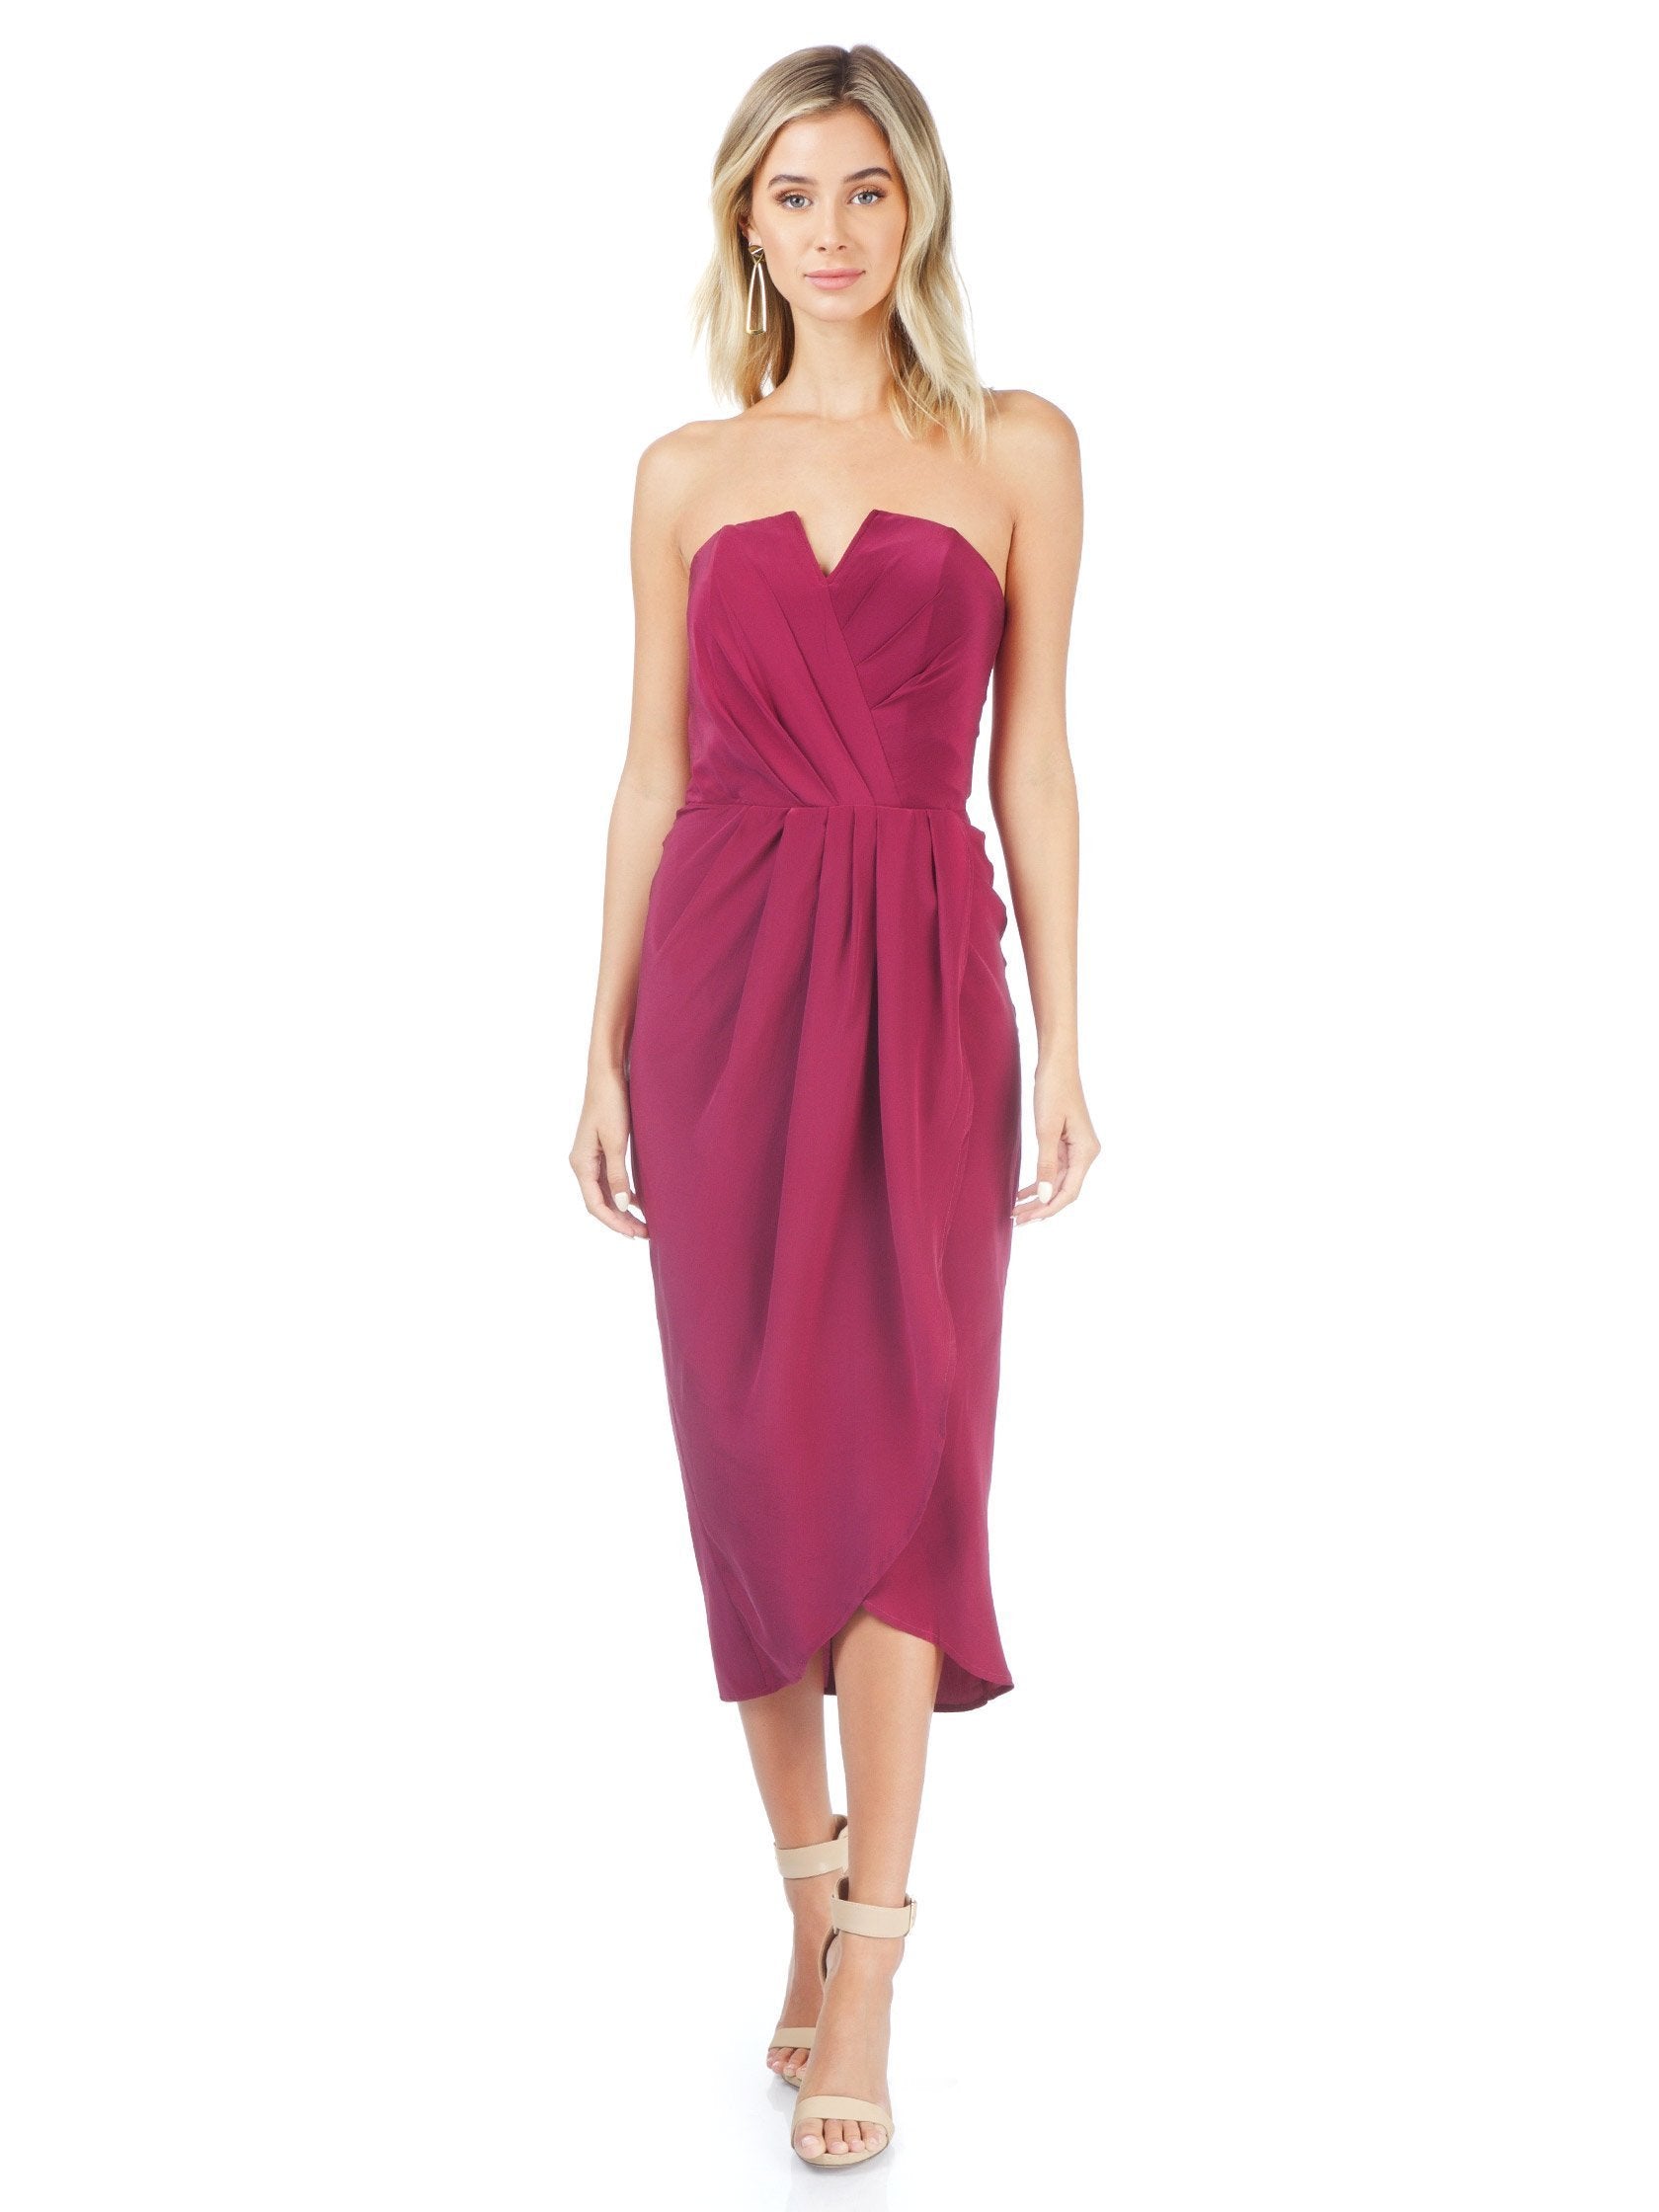 Girl outfit in a dress rental from YUMI KIM called Glamour Night Midi Dress